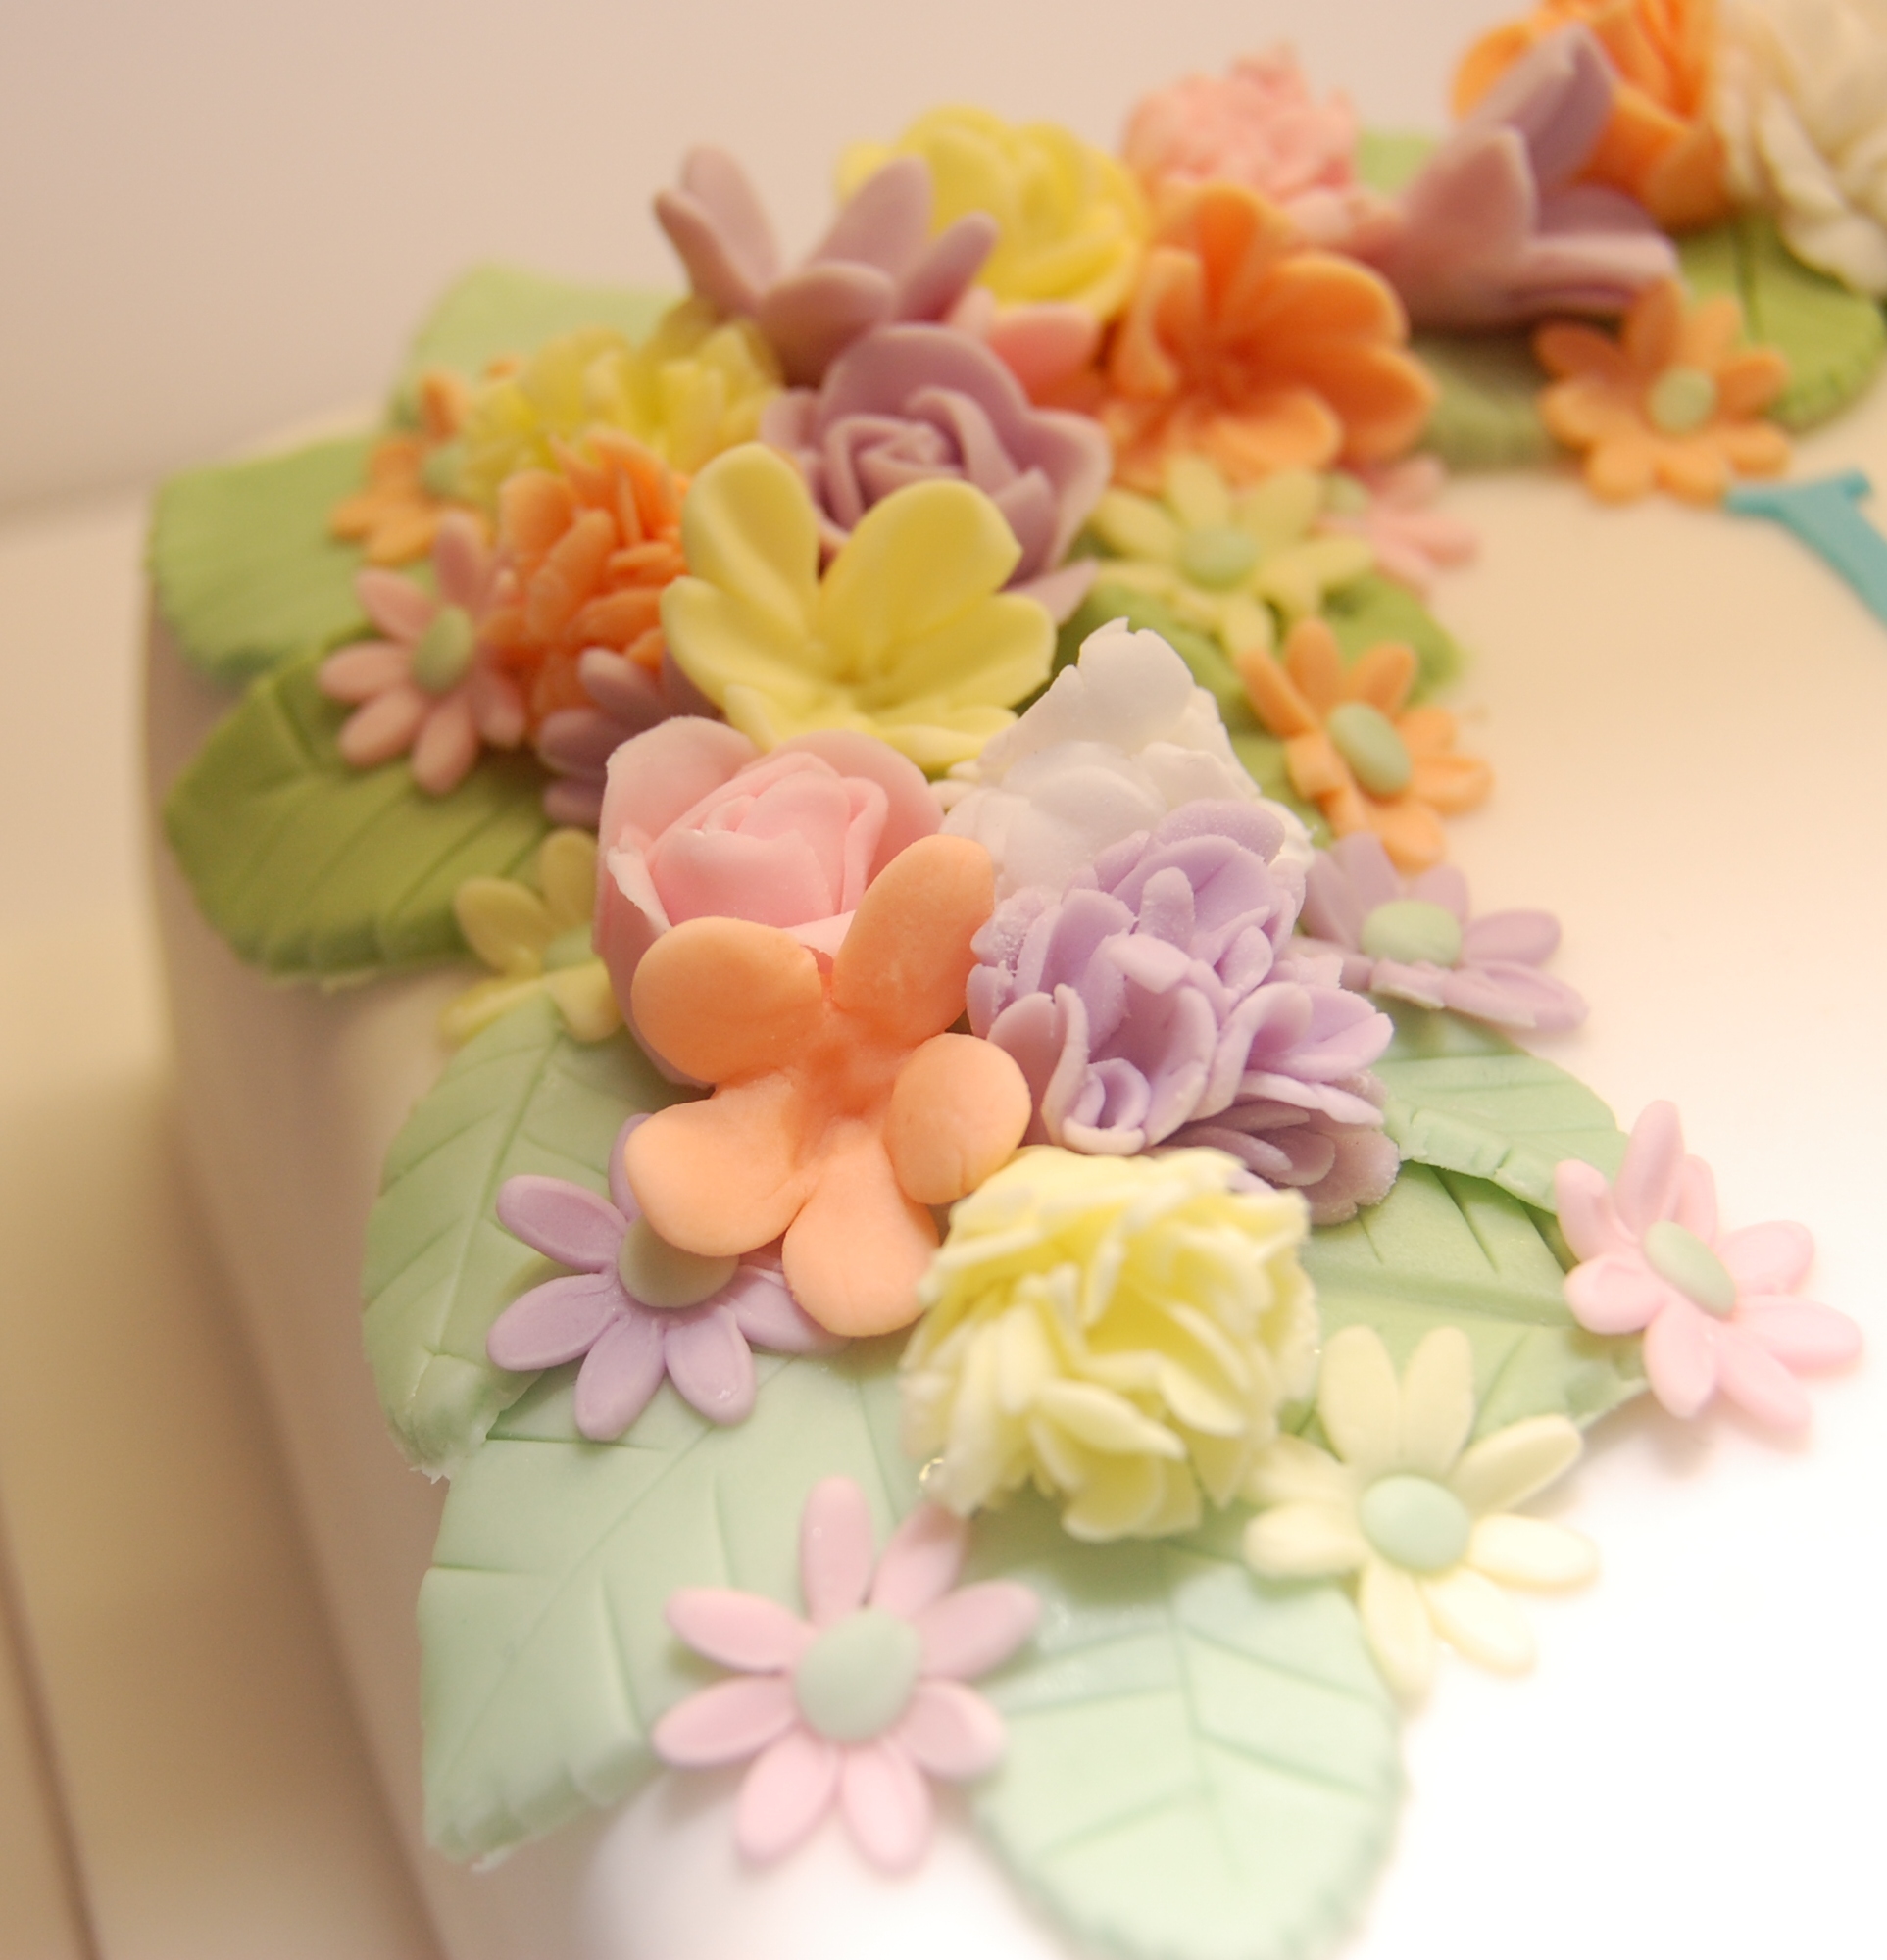 Rilicious - #latepost Cake done for my Bestie 👭 commissioned by her  husband……She loves Parijat also known as night flowering Jasmine flowers so  it was a special request from her husband to